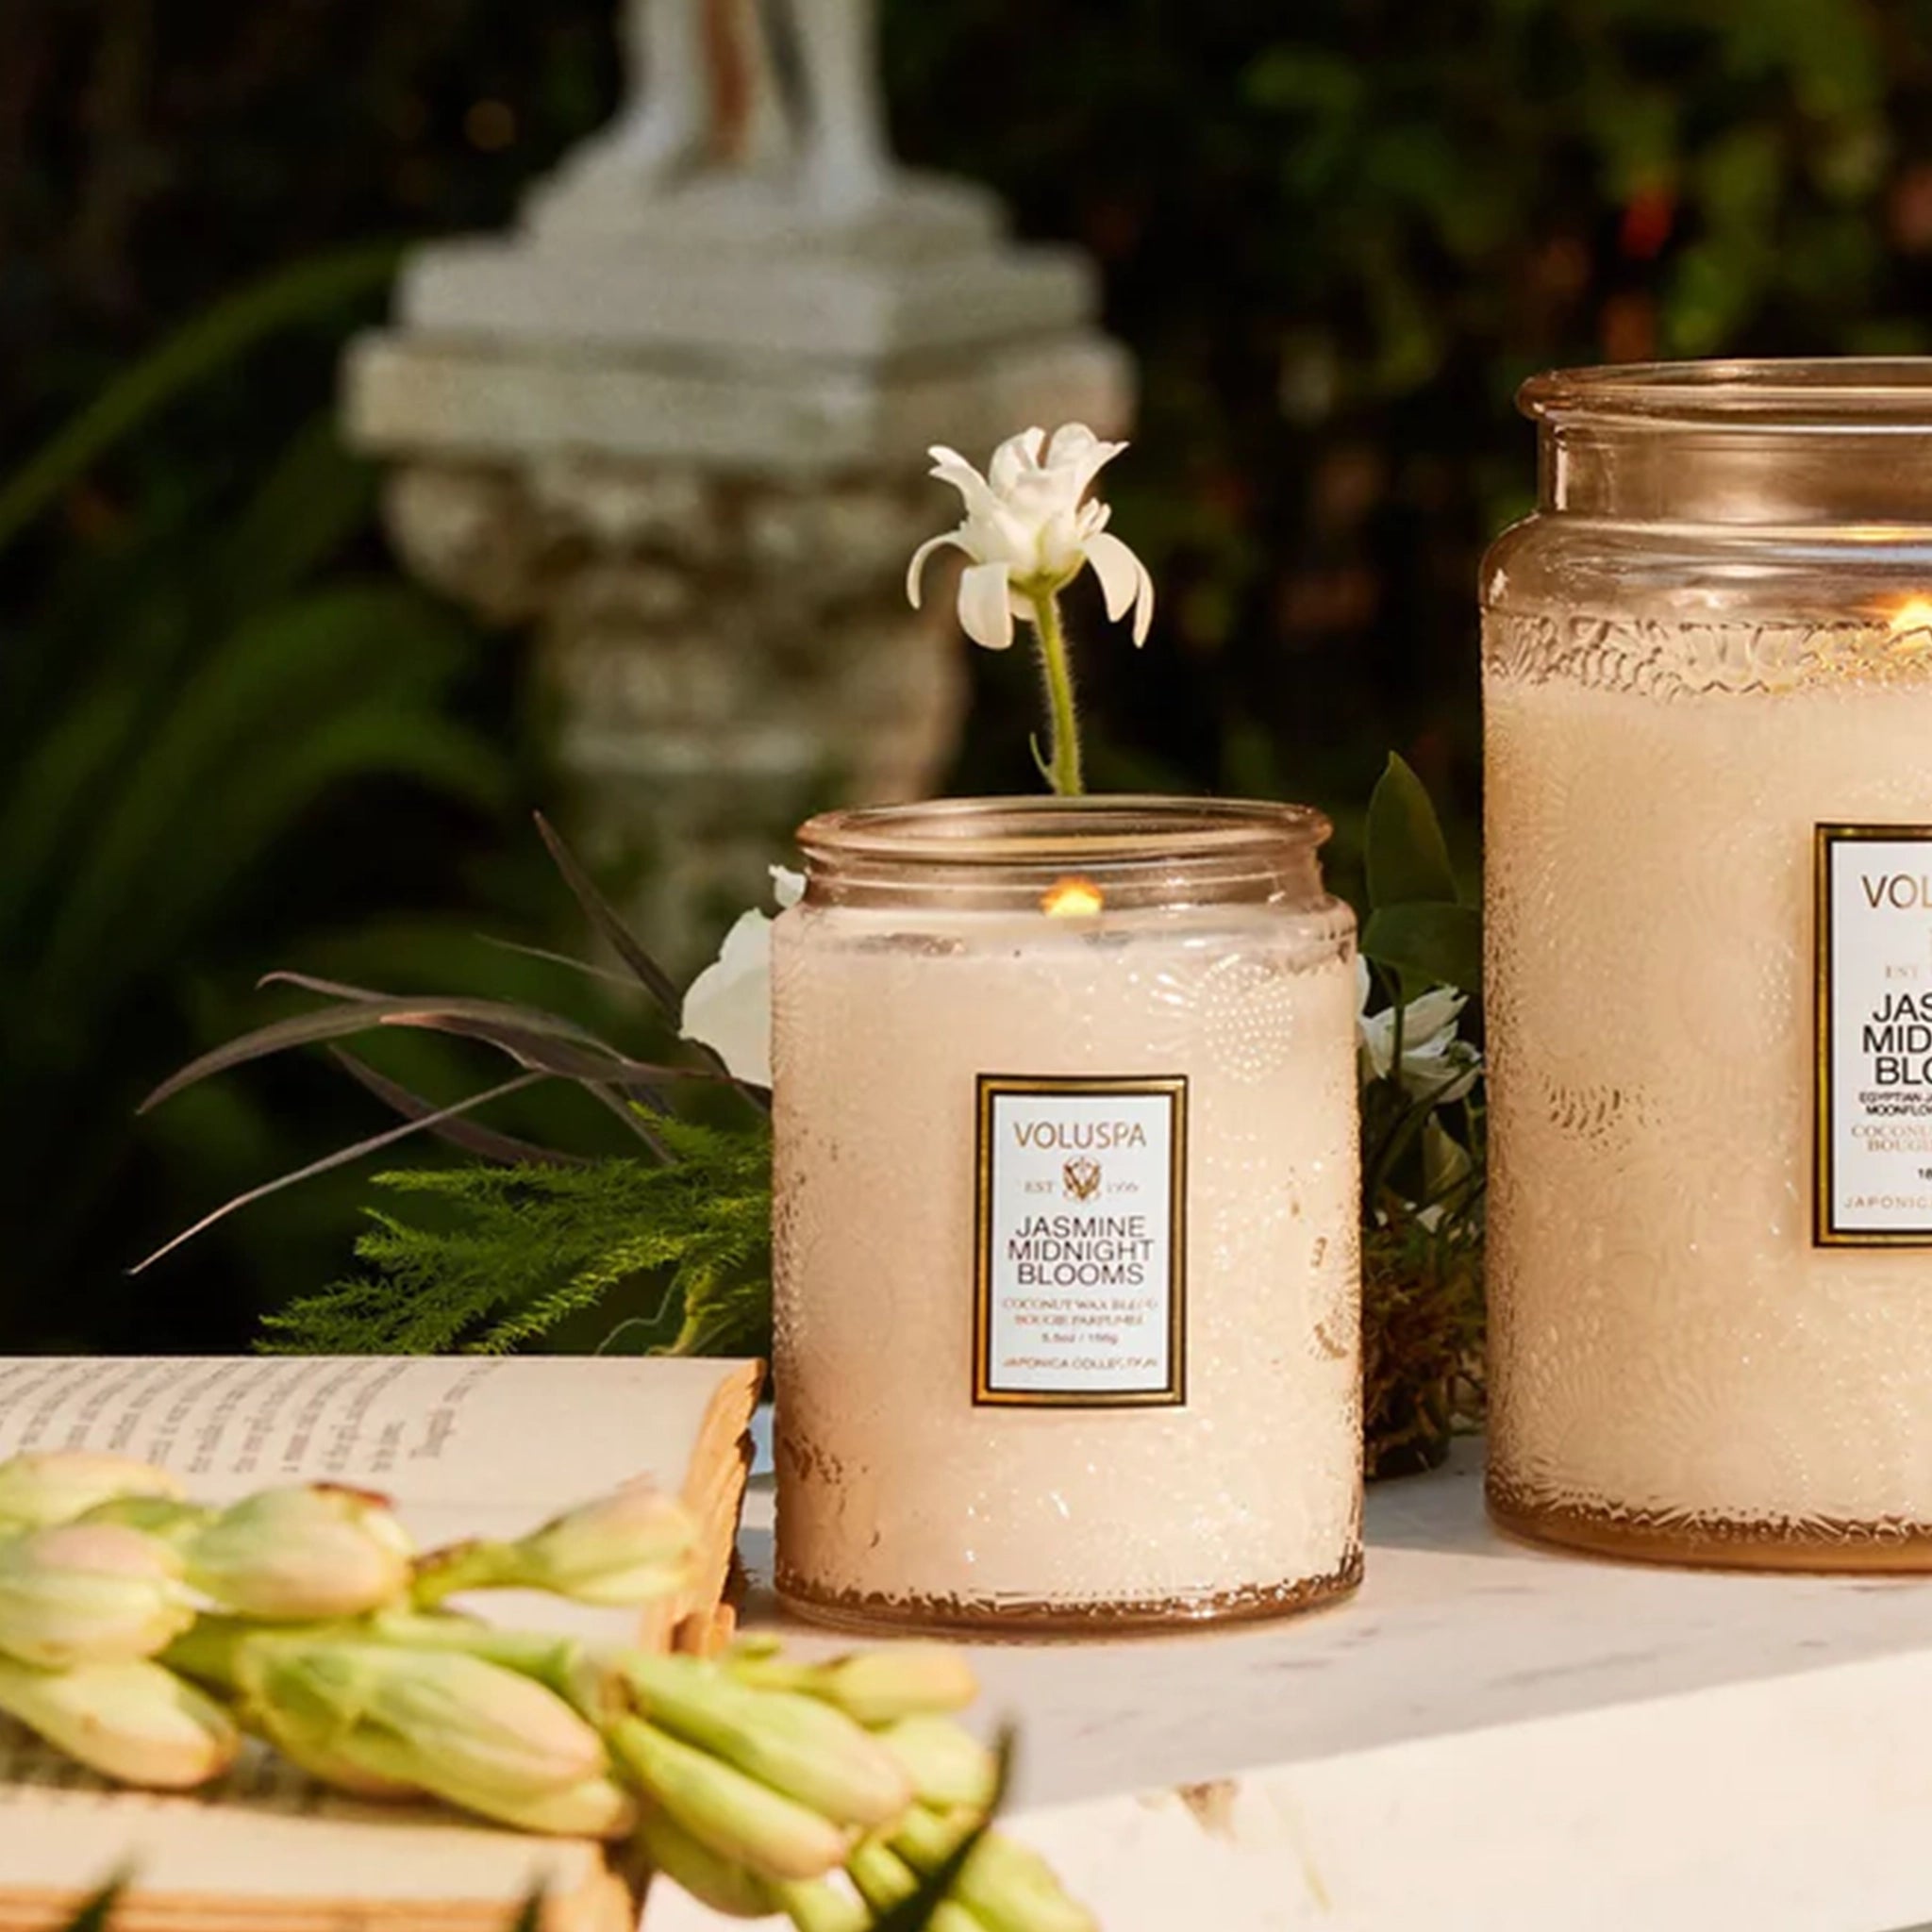 An apricot colored decorative glass jar candle with an etched floral pattern in the glass and a white rectangular label in the center that reads, &quot;Jasmine Midnight Blooms&quot;.